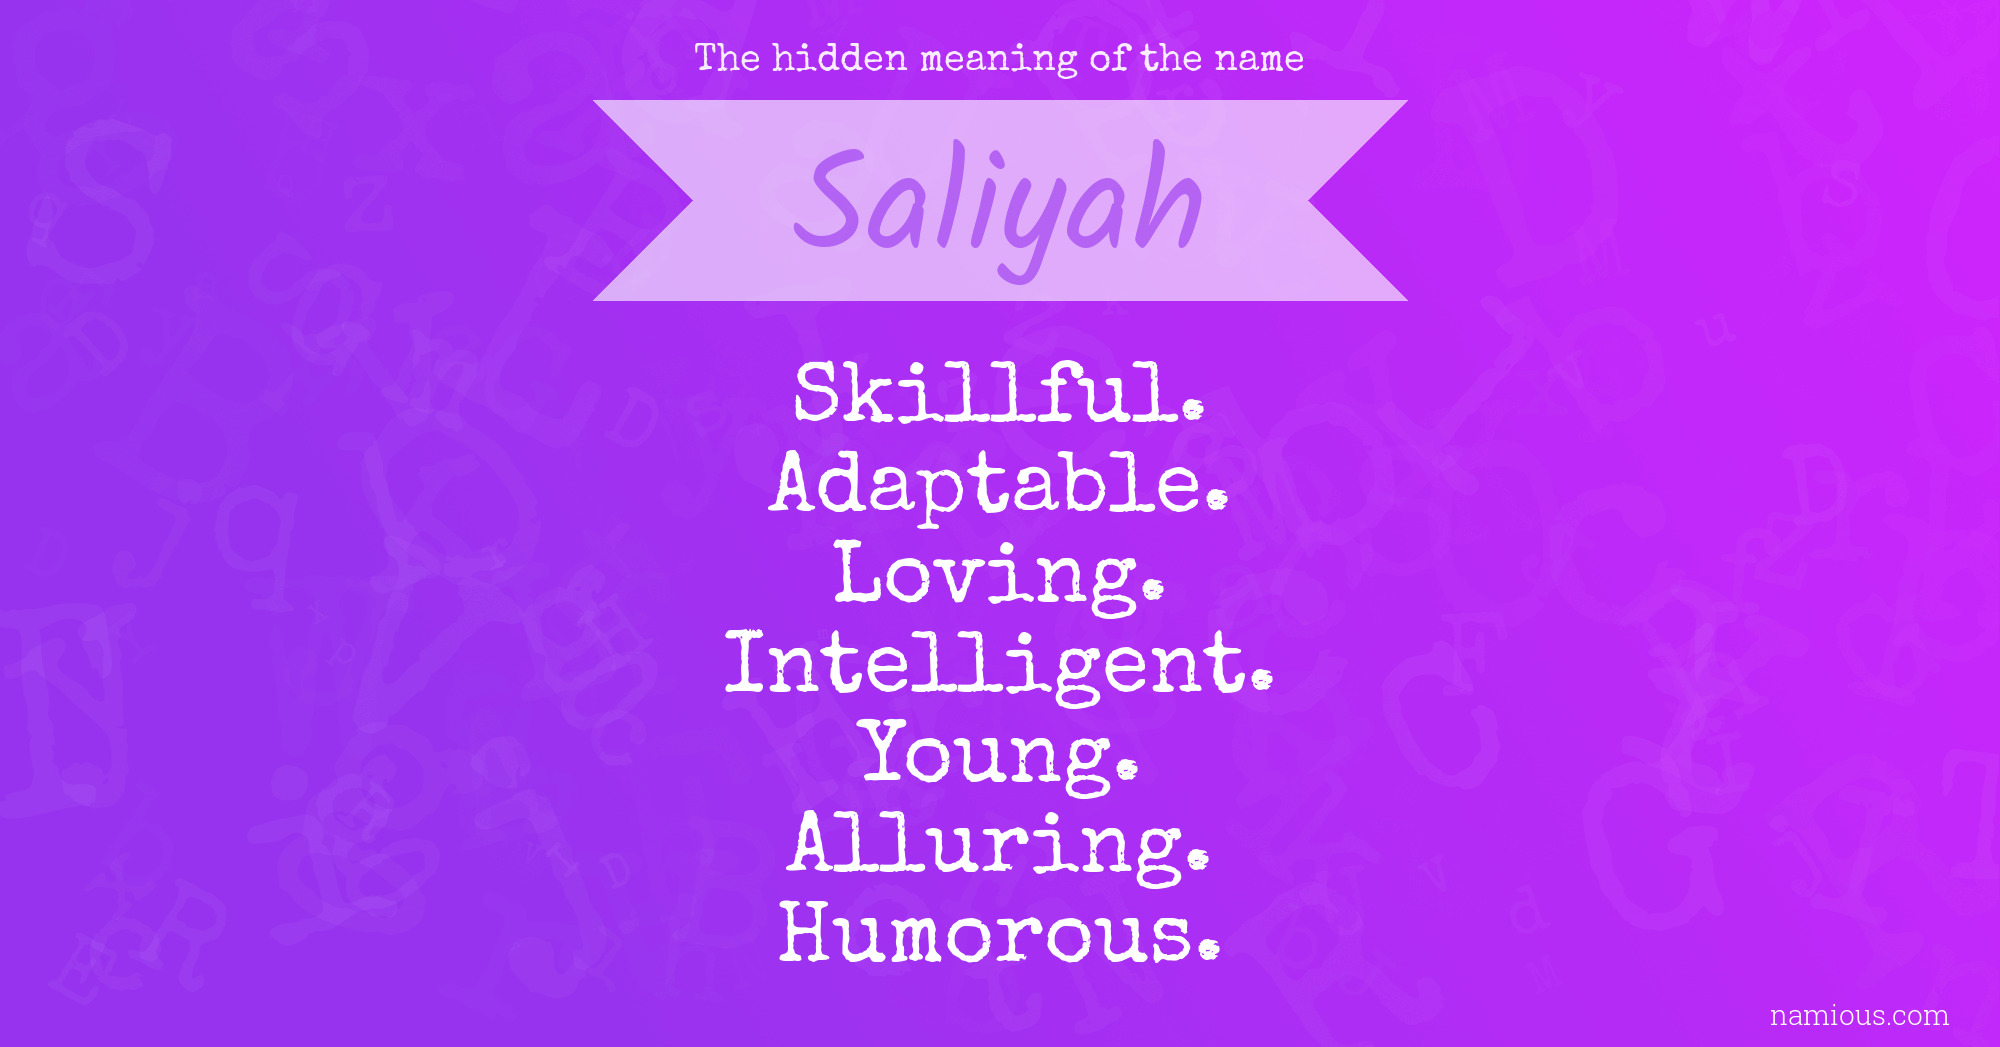 The hidden meaning of the name Saliyah